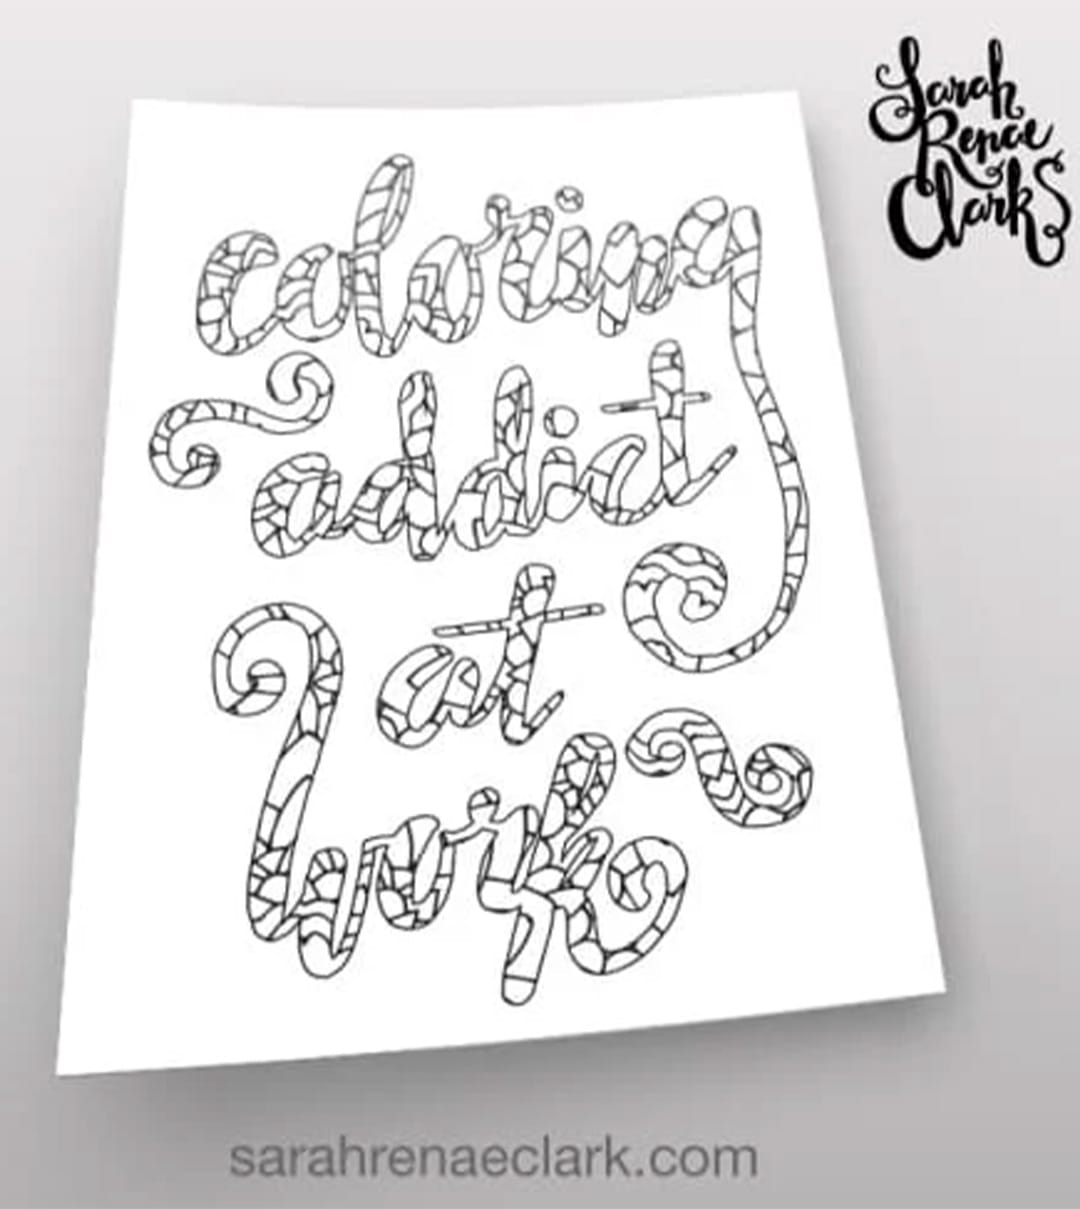 Free Coloring addict at work coloring page